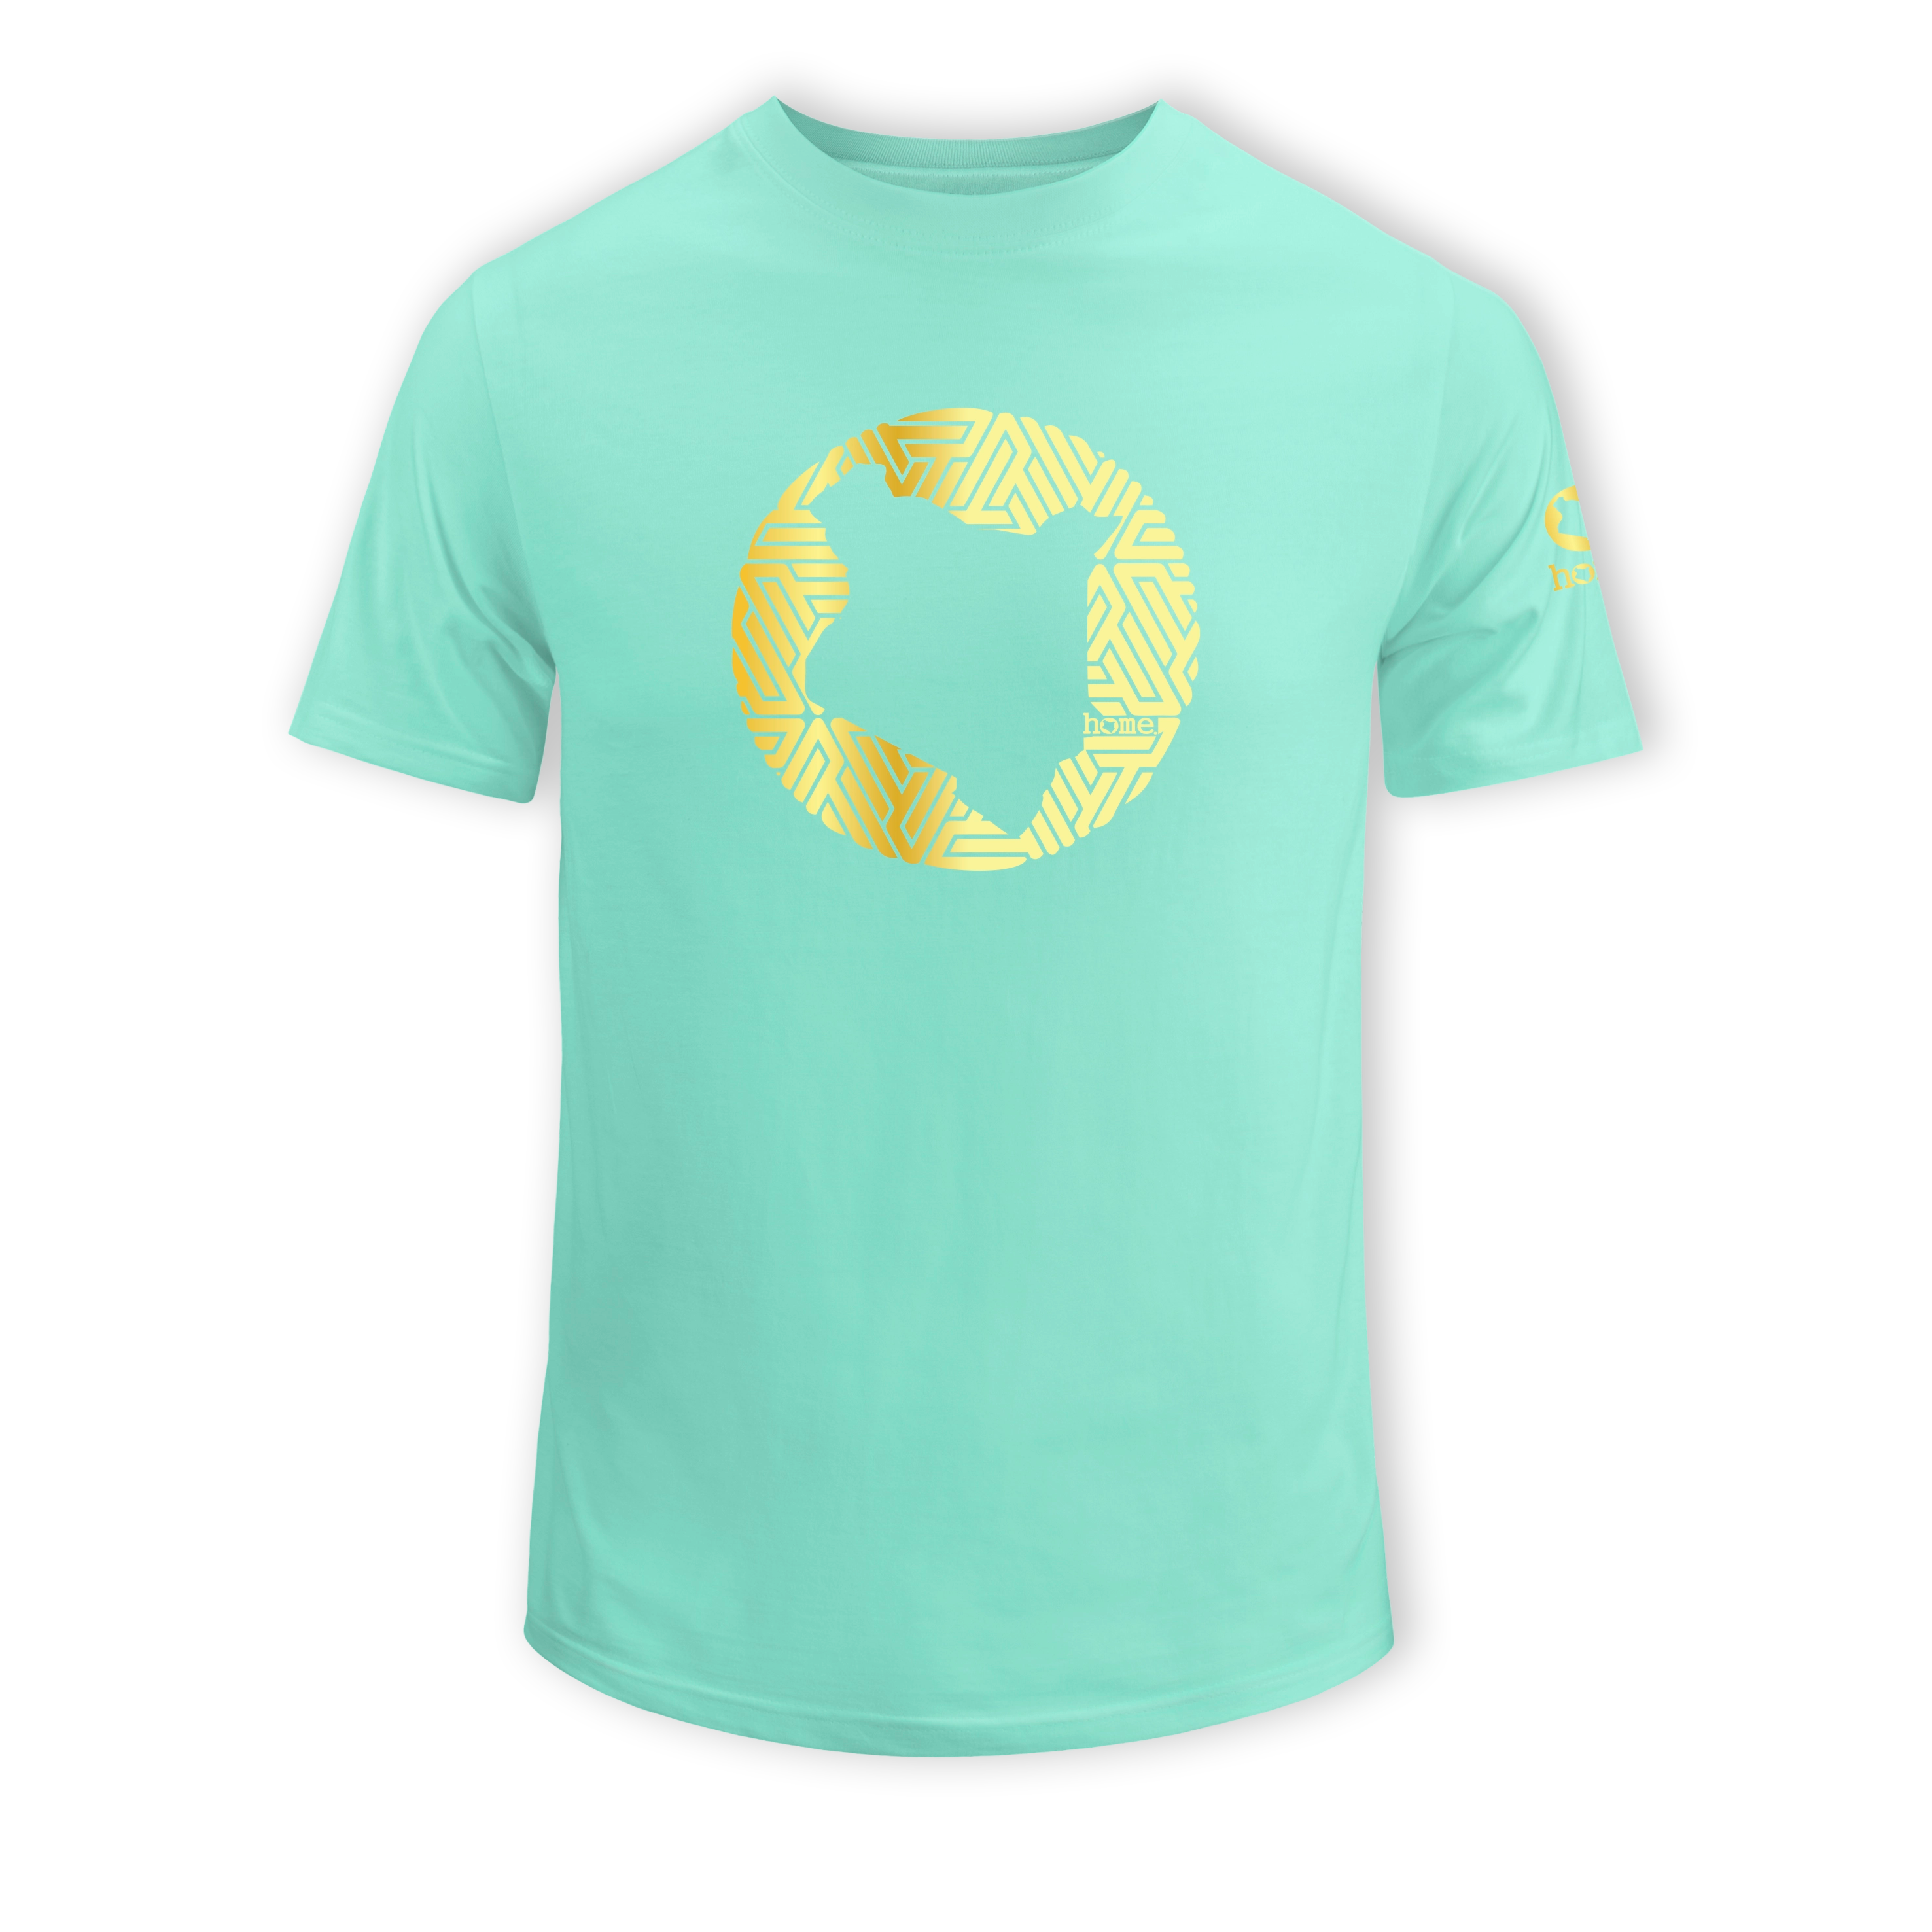 home_254 KIDS SHORT-SLEEVED TURQUOISE GREEN T-SHIRT WITH A GOLD MAP PRINT – COTTON PLUS FABRIC